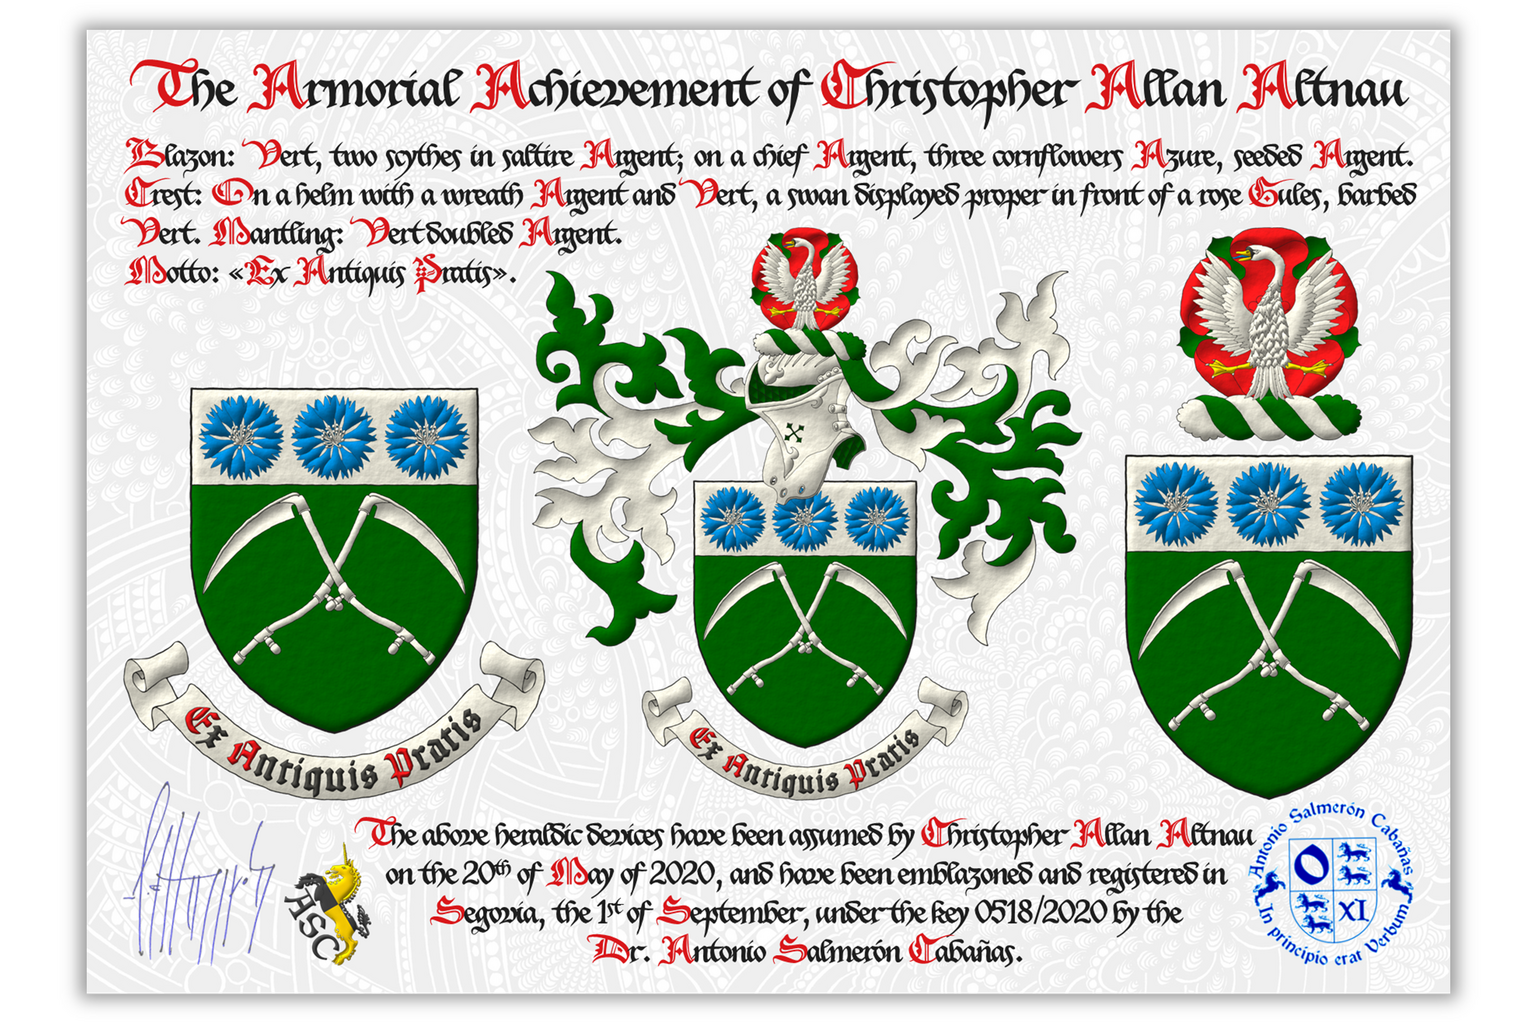 Heraldic document for the coat of arms of Christopher Altnau. His coat of arms has been designed by him, and the heraldic document has been emblazoned, signed, sealed and dated by me.